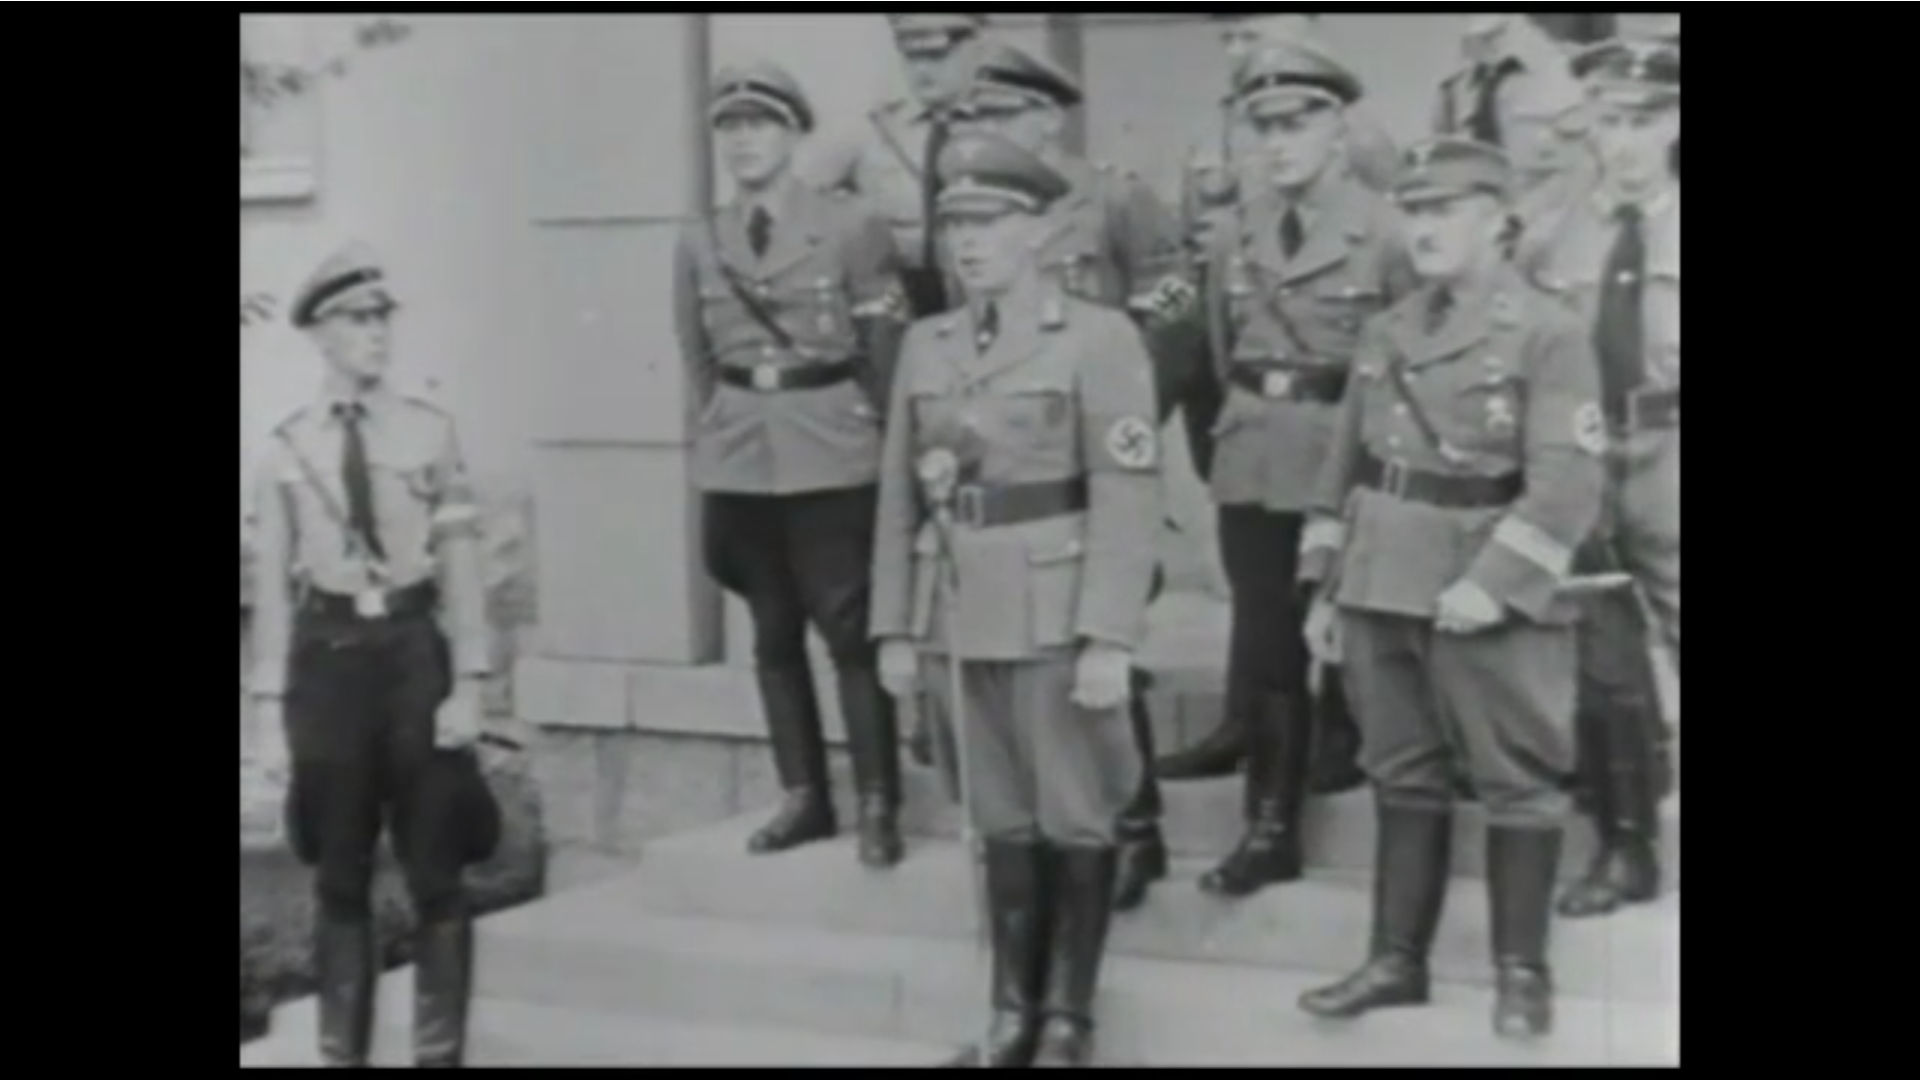 Watch Full Movie - My Favorite Hitler Youth